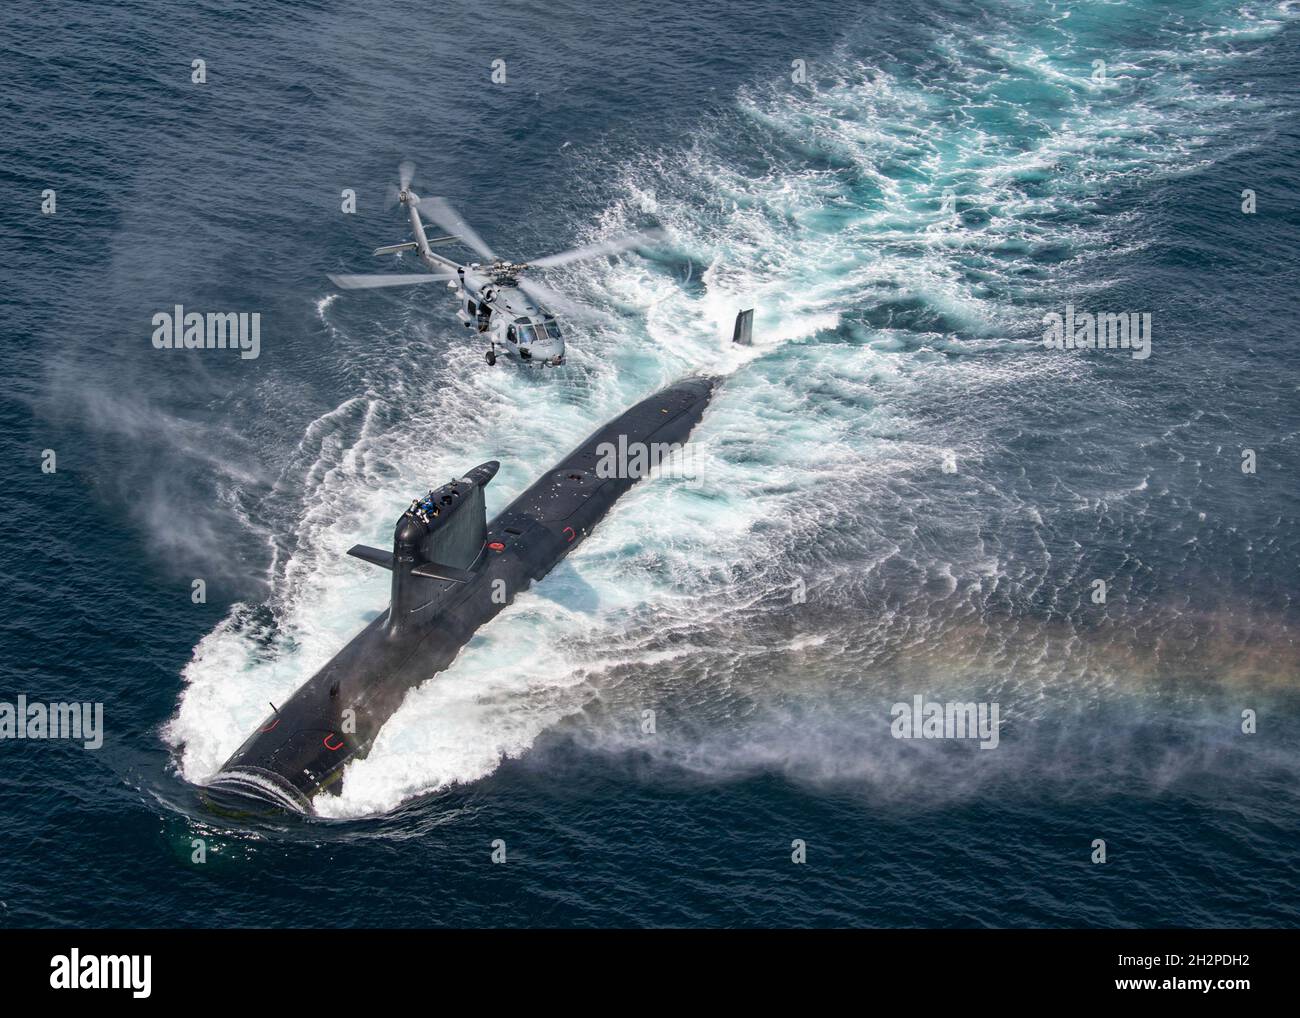 San Diego, United States. 16 August, 2021. A U.S. Navy MH-60R Seahawk helicopter flies over a Chilean Navy Scorpene Class Submarine CS Carrera during Diesel-Electric Submarine multi-national Initiative Hoist Exercise 2021 August 16, 2021 near San Diego, California.  Credit: MC2 Chelsea Meiller/U.S. Navy/Alamy Live News Stock Photo